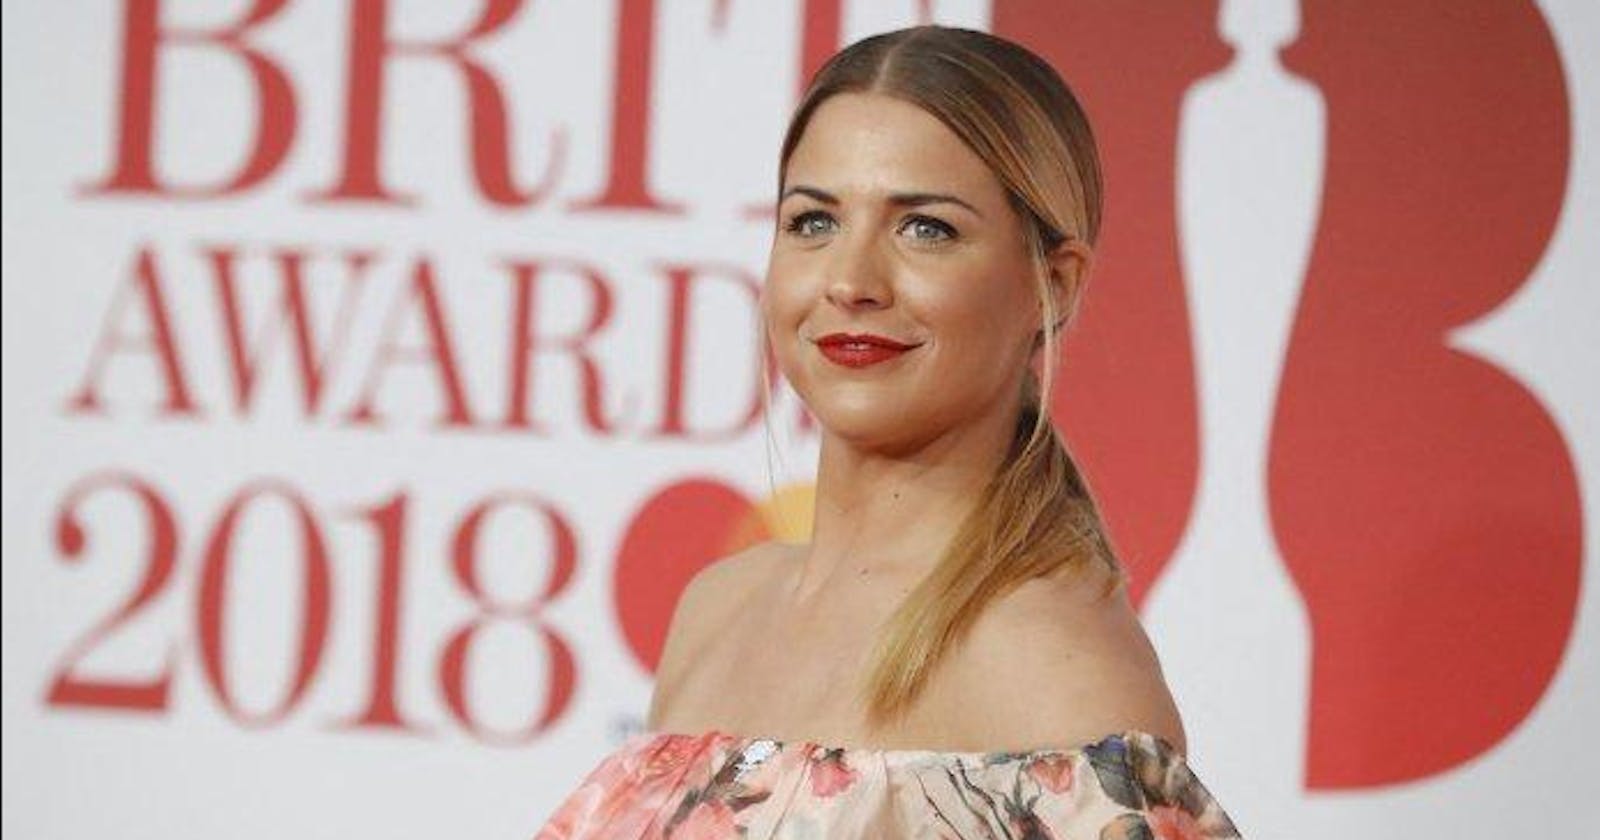 Gemma Atkinson responds to comments about the baby in her womb